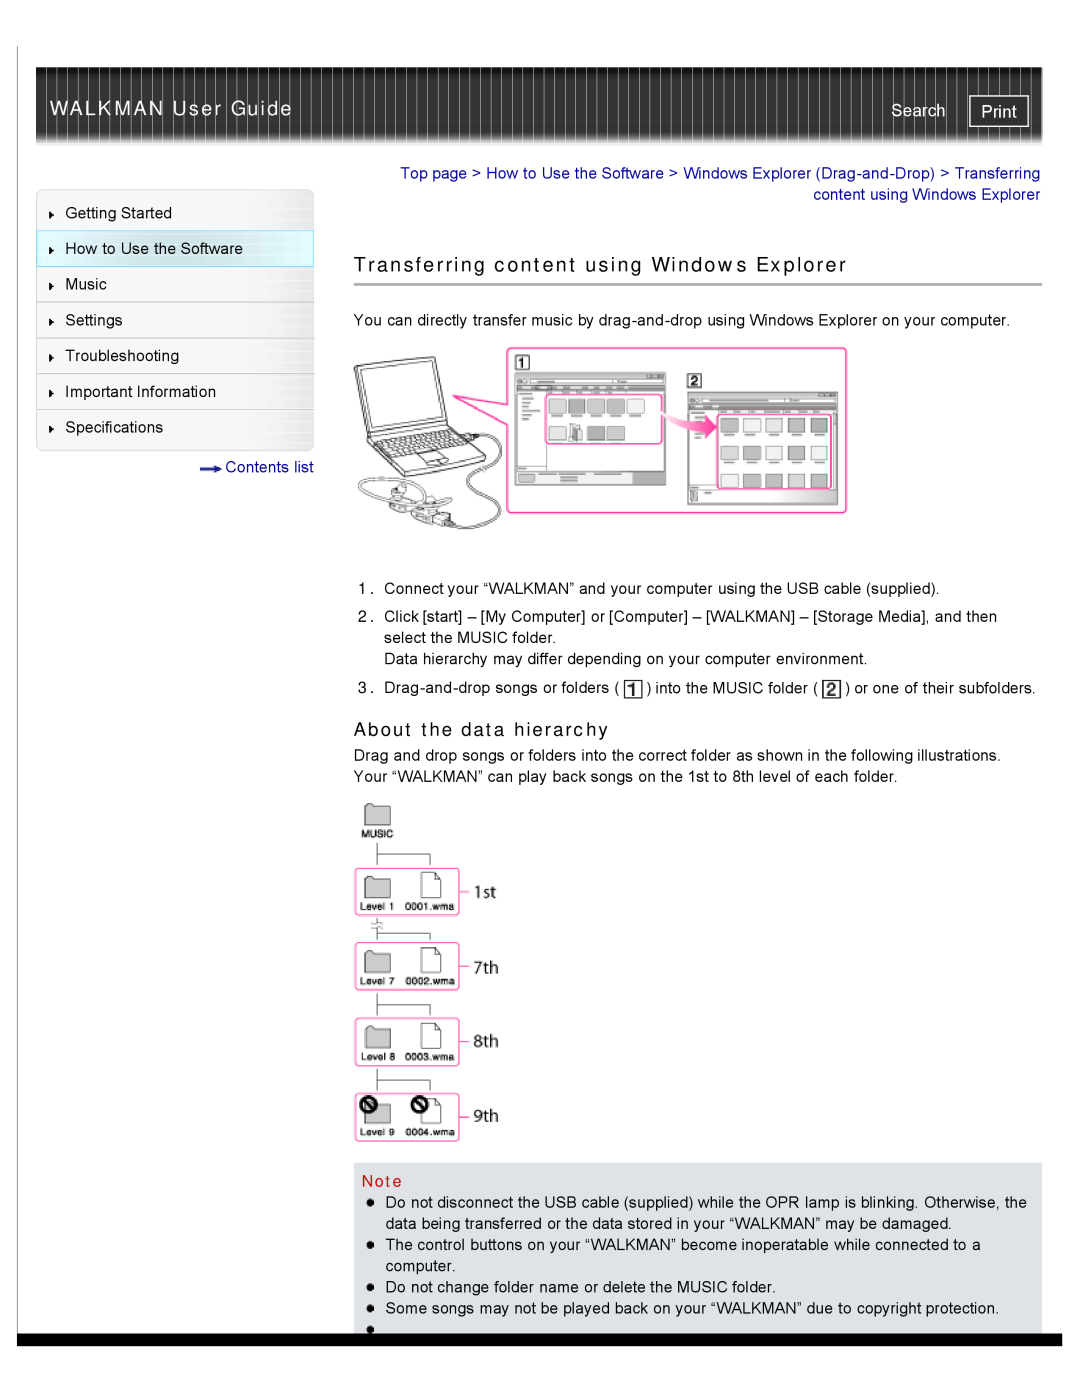 Sony NWZW262WHI Transferring content using Windows Explorer, About the data hierarchy, WALKMAN User Guide, Search, Print 